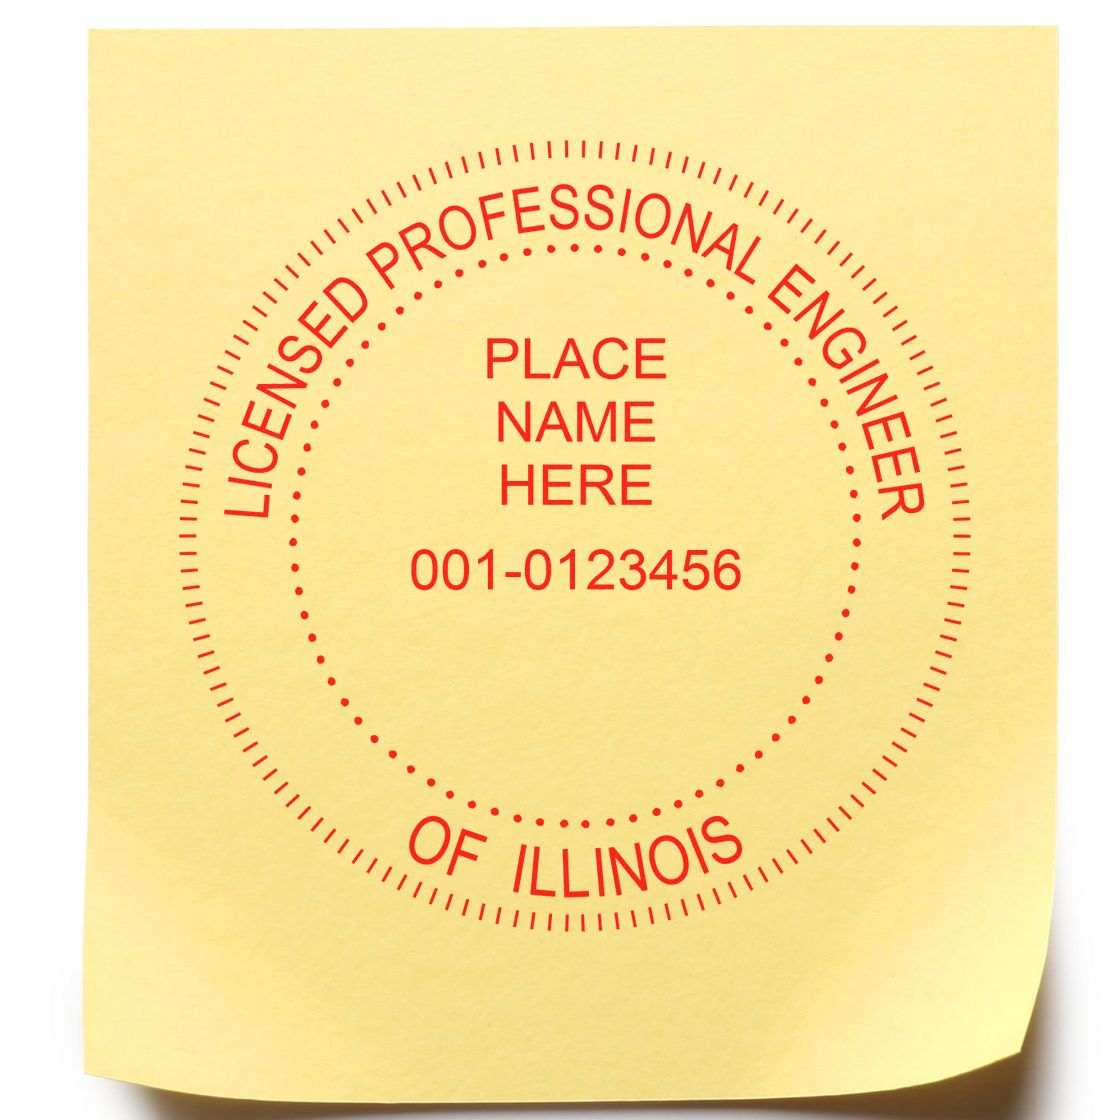 A lifestyle photo showing a stamped image of the Illinois Professional Engineer Seal Stamp on a piece of paper